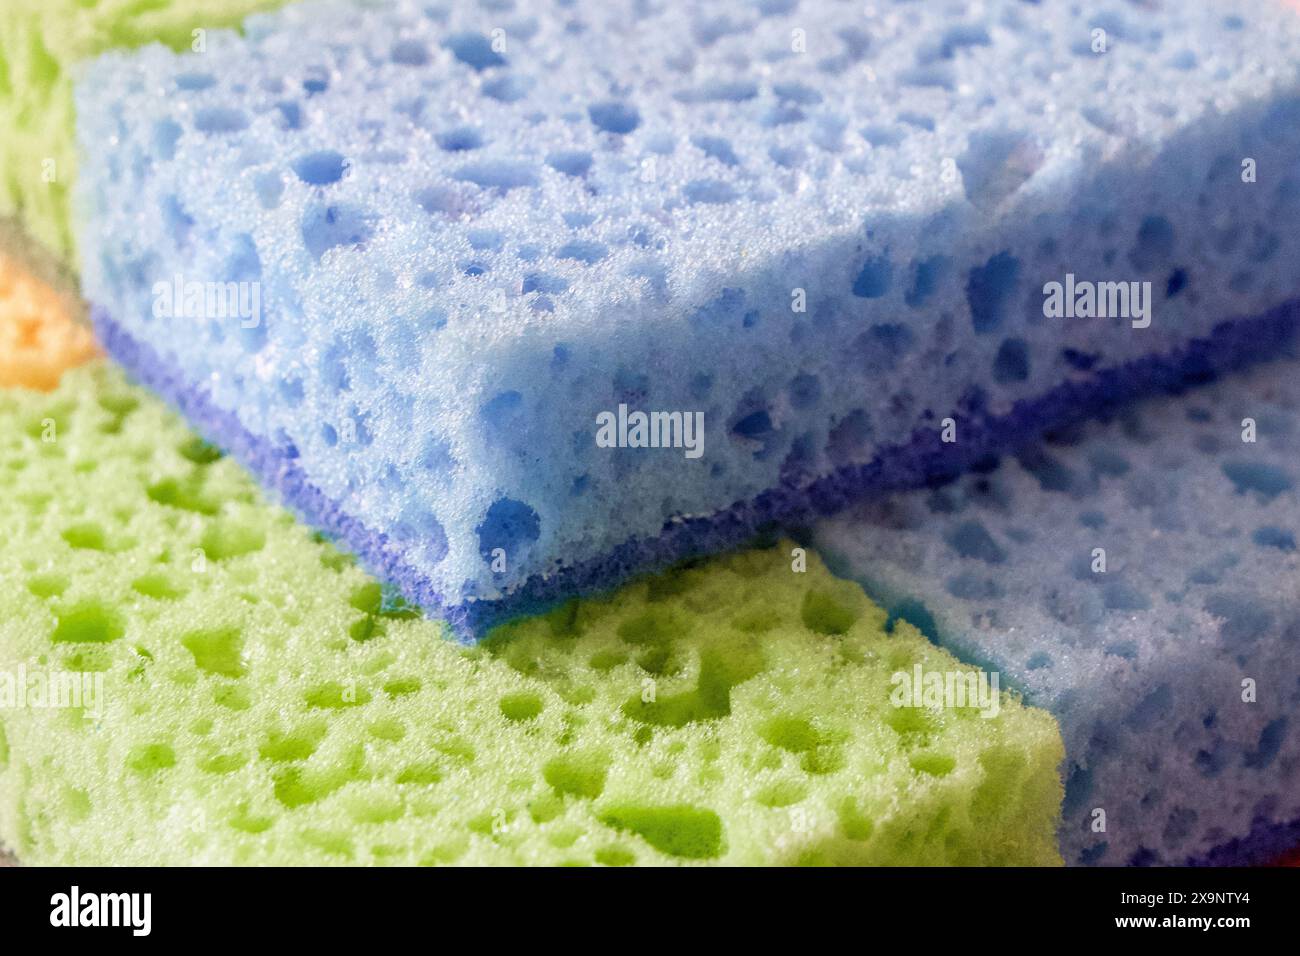 Washing Essentials. Colorful sponges with visible pores for scrubbing. Uses for Home maintenance articles, cleaning product ads. Stock Photo